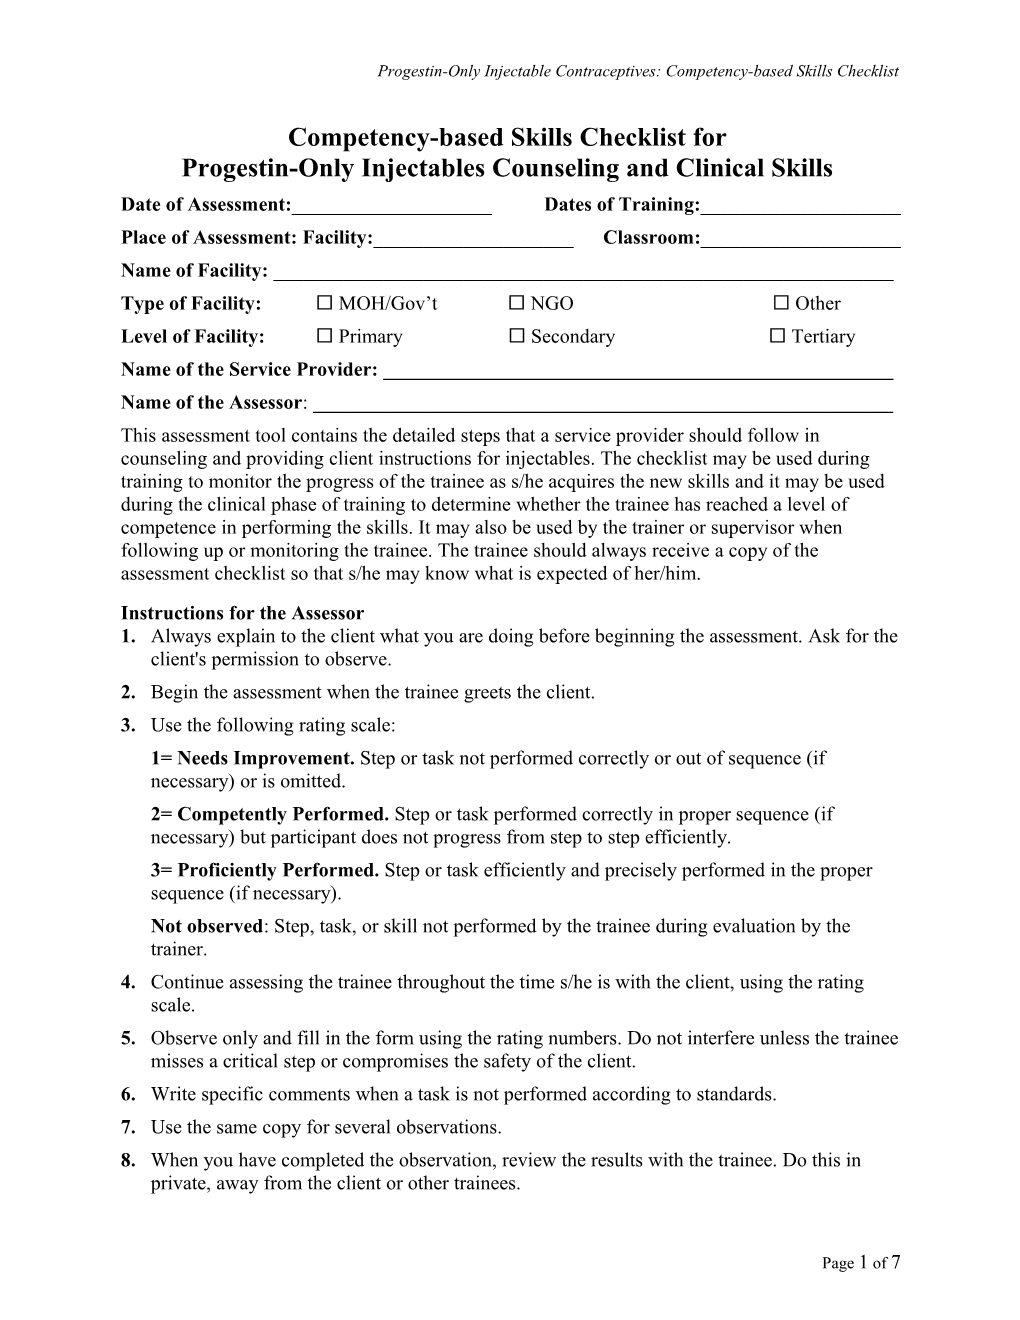 Progestin-Only Injectable Contraceptives: Competency-Based Skills Checklist